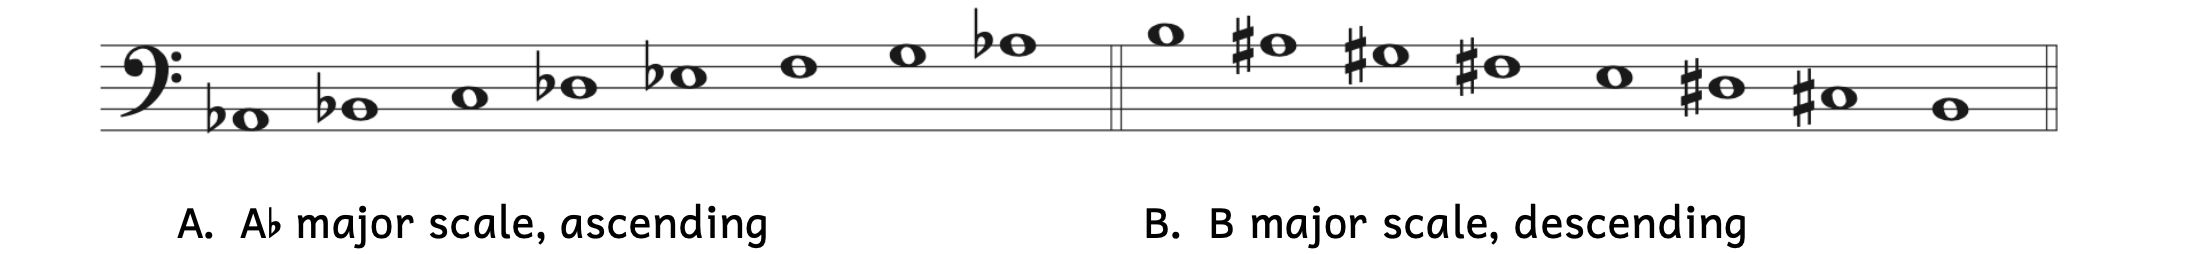 Example A shows the added accidentals after applying the whole steps and half steps from the previous steps. Added accidentals include B-flat, D-flat, and E-flat. Added accidentals for Example B include A-sharp, G-sharp, F-sharp, D-sharp, and C-sharp.